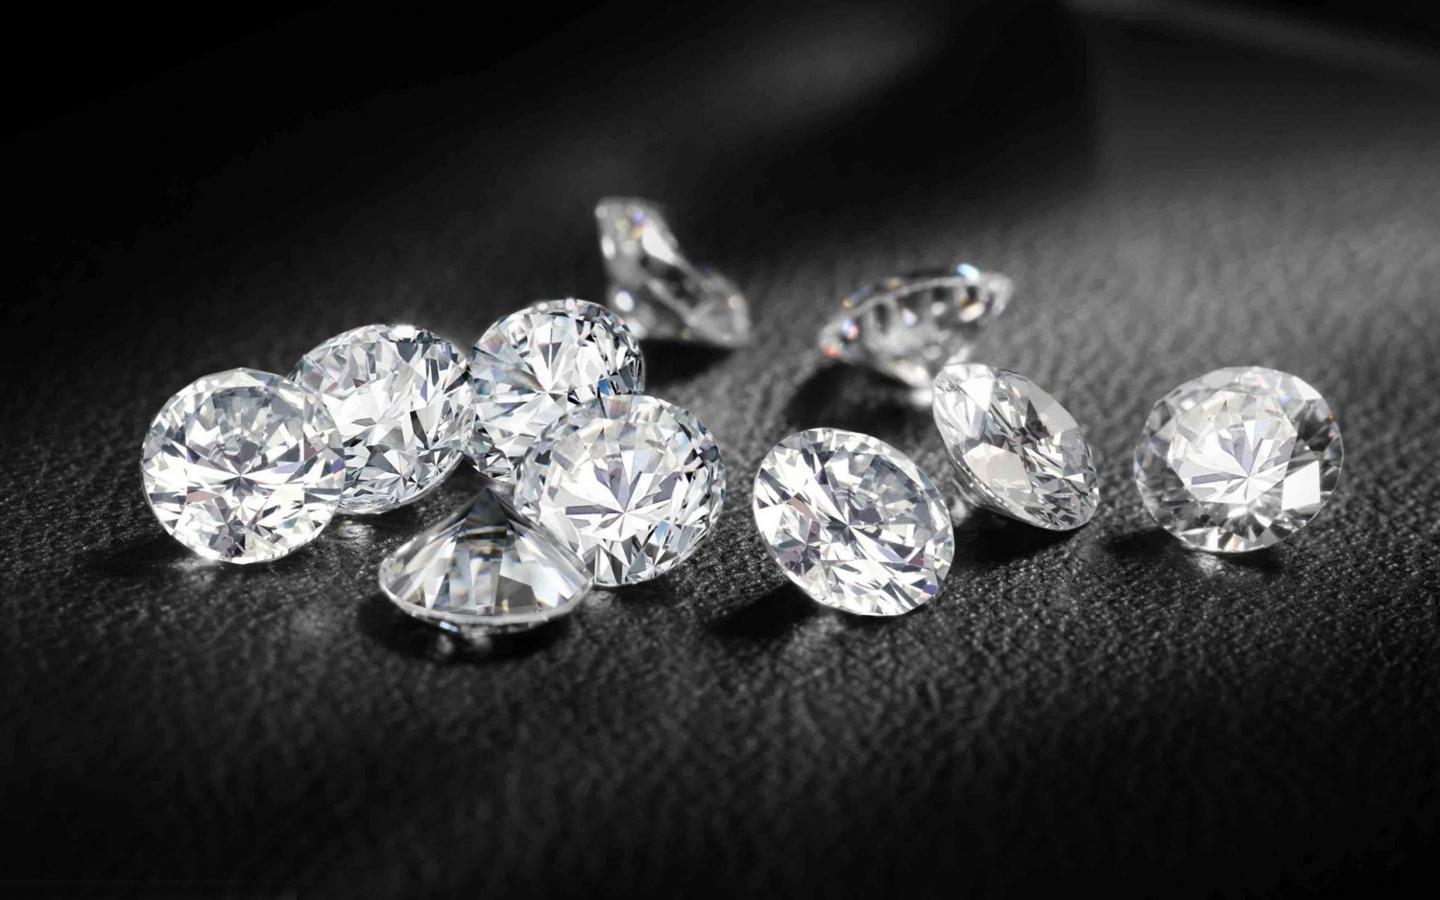 Buying Ethical Diamonds & Jewellery: the Supply Chain